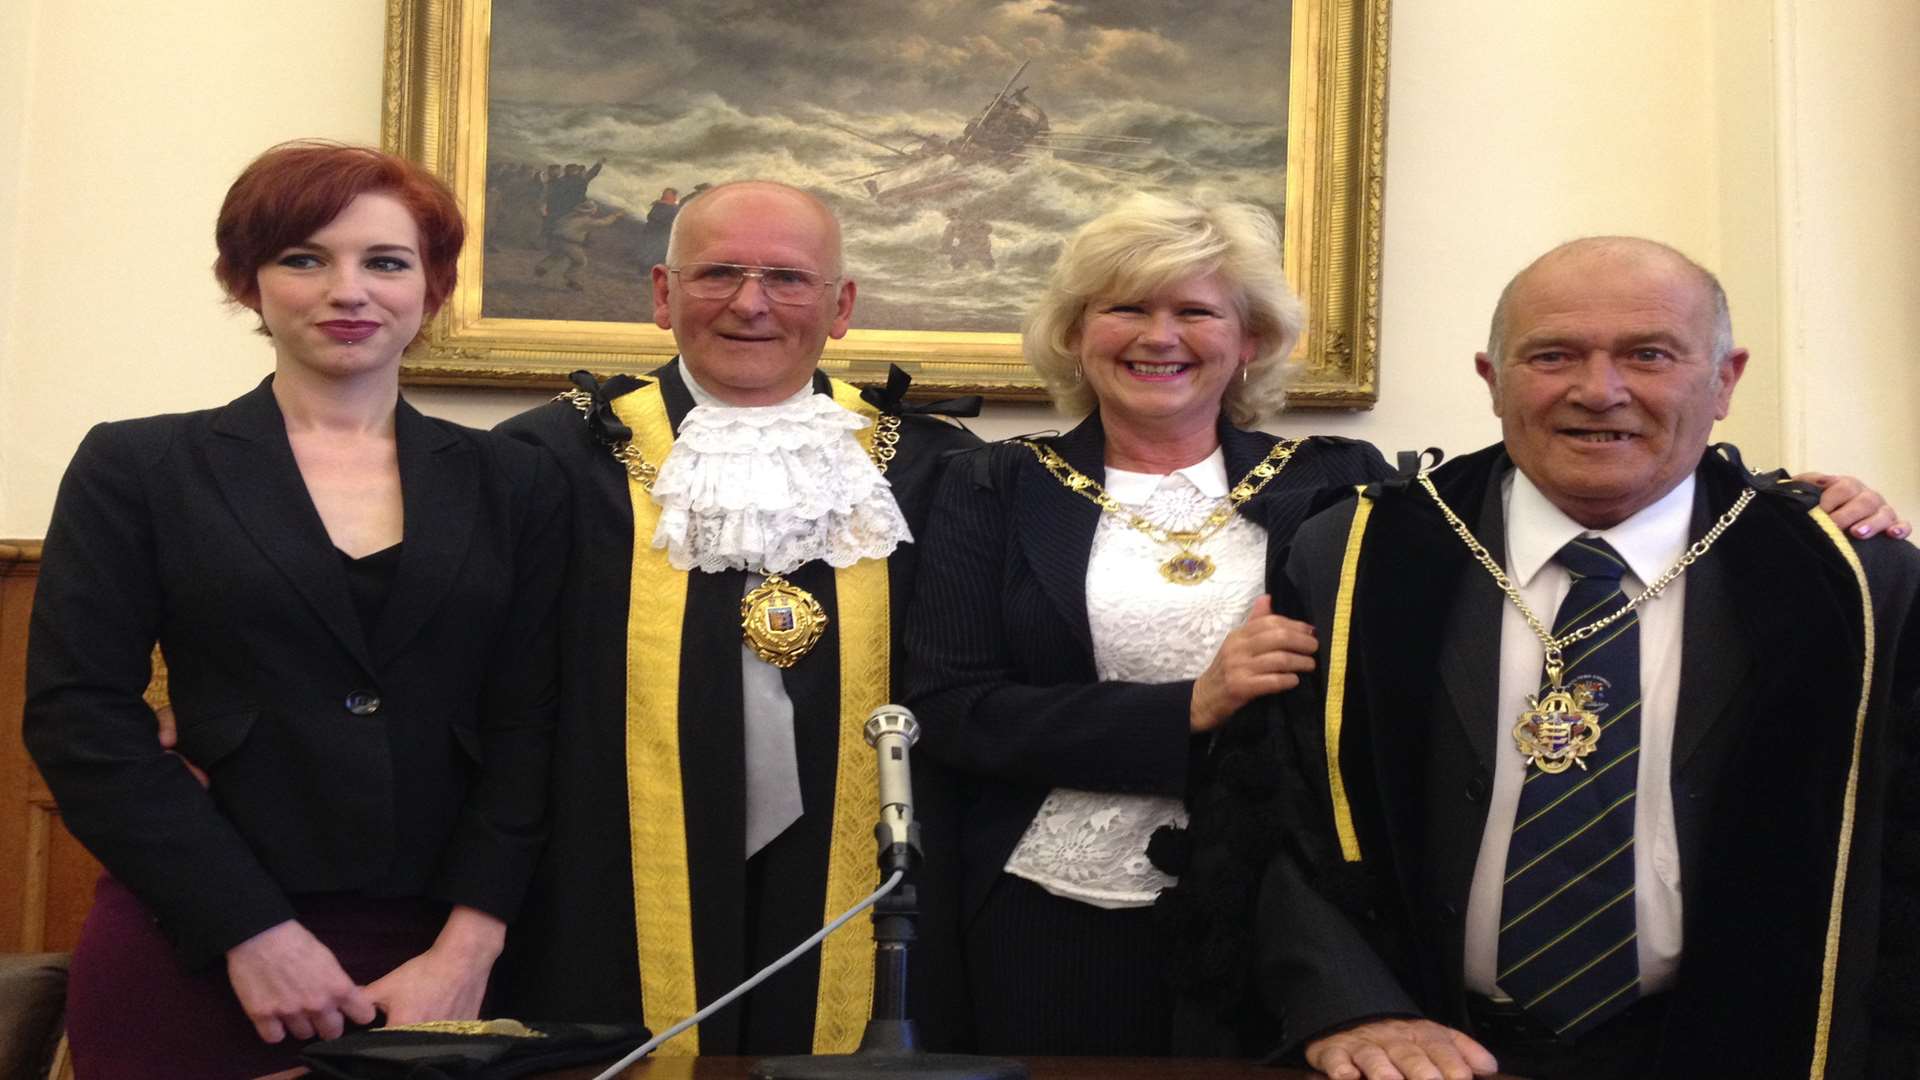 Cllr Adrian Friend in the Mayor's Robe which is believed to have been replaced last year